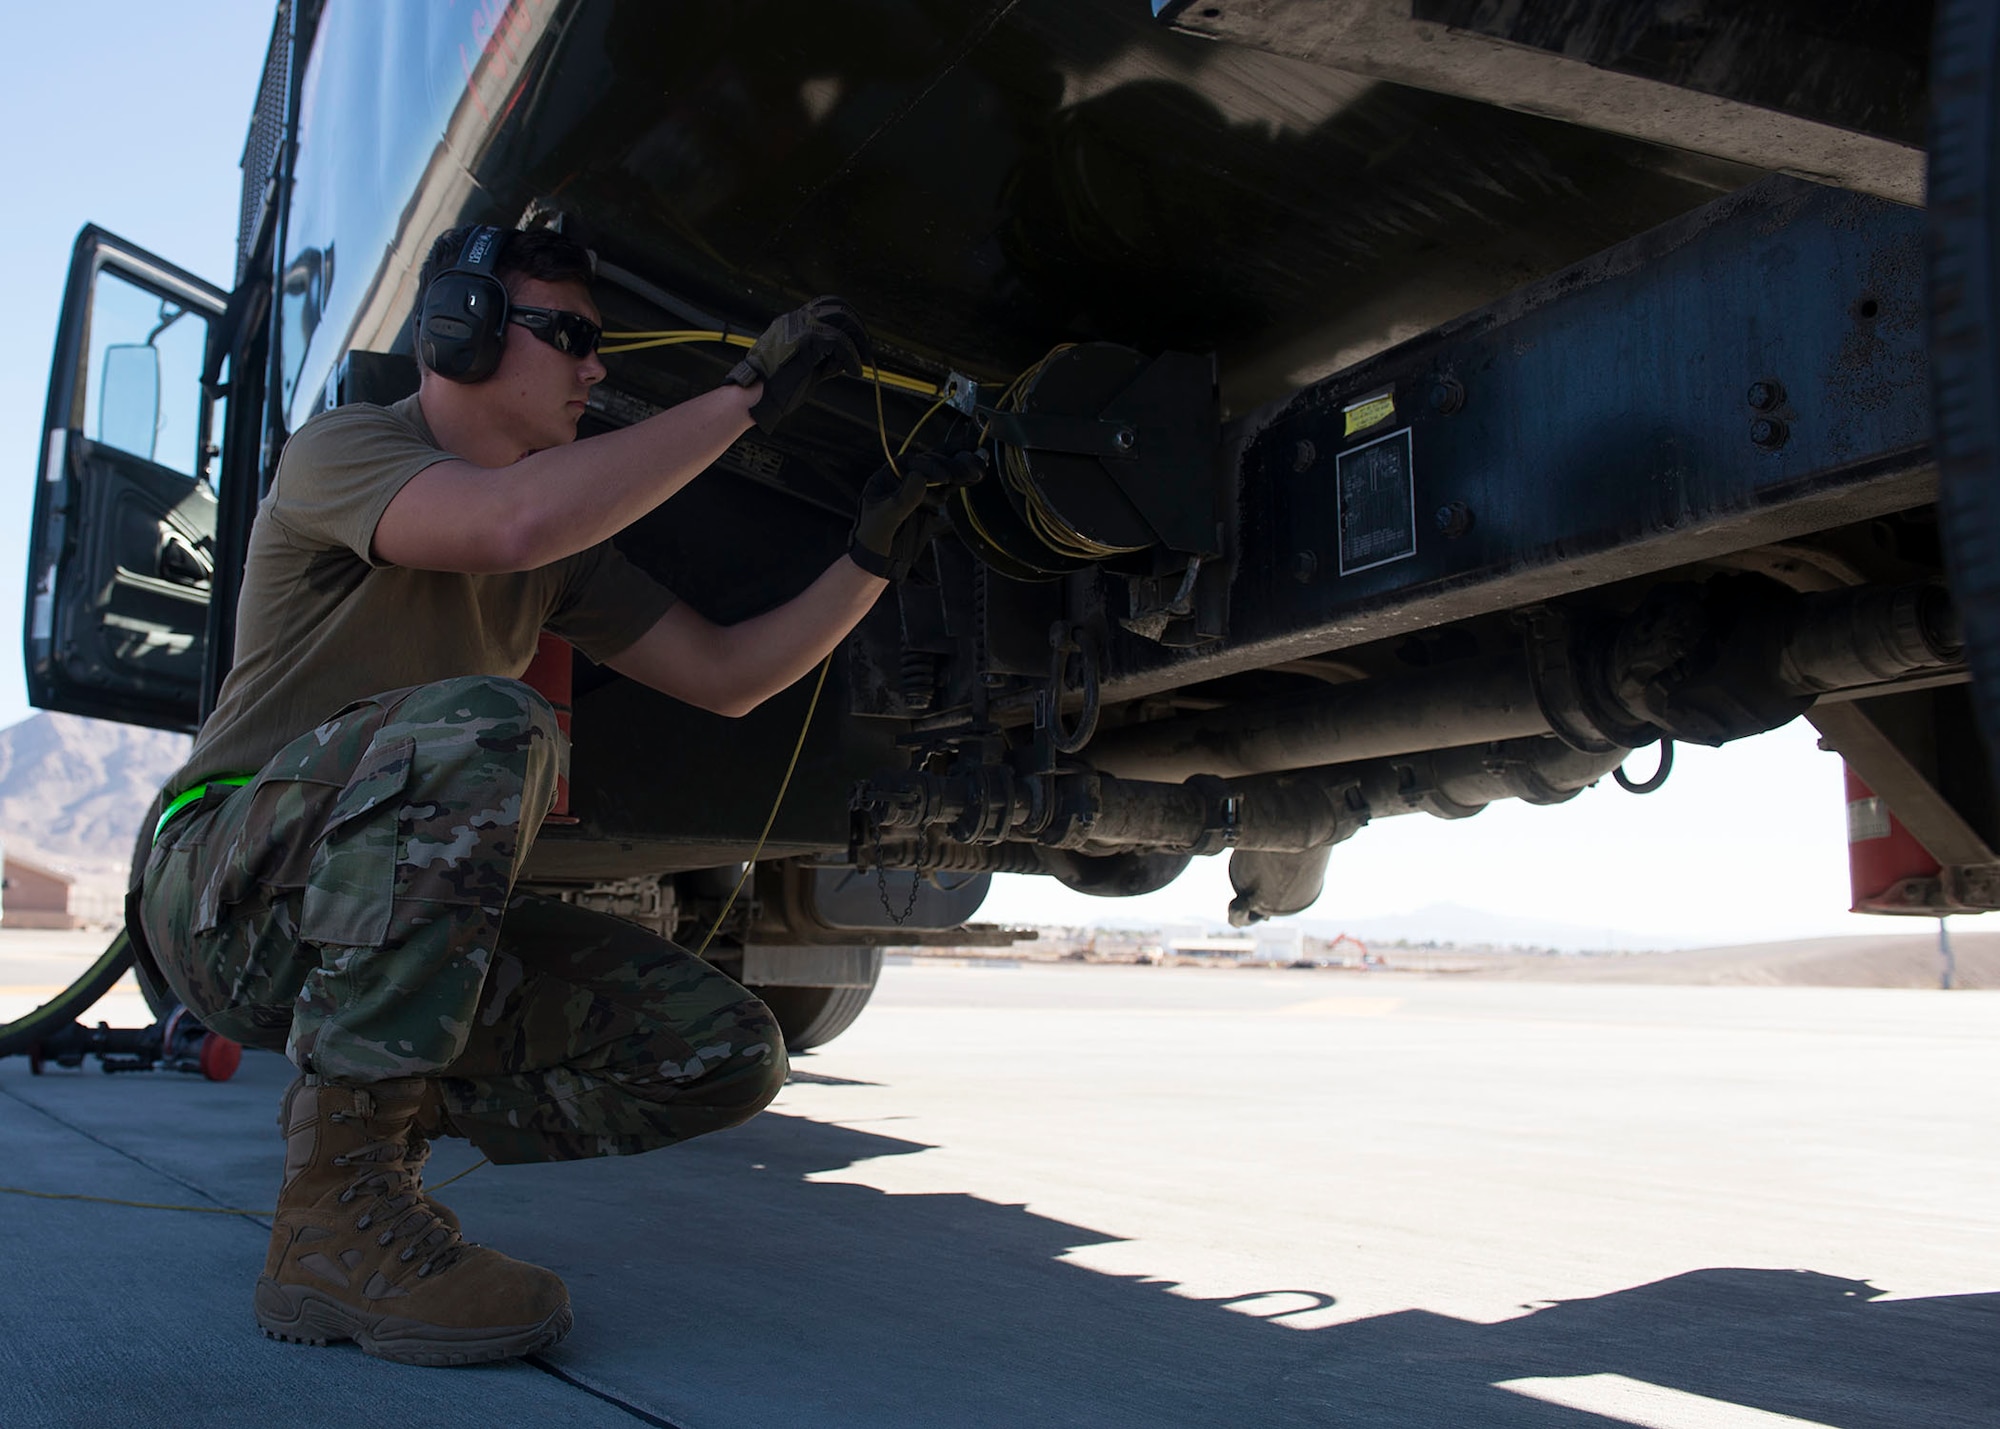 Airman 1st Class Joseph Main, 99th Logistics Readiness Squadron fuels distribution operator, rolls up wiring underneath this refueling tanker on Neliis Air Force Base, Nov. 7, 2018. Hot-pit refueling is required as annual training for 99th LRS members. (U.S. Air Force photo by Airman 1st Class Bryan T. Guthrie)